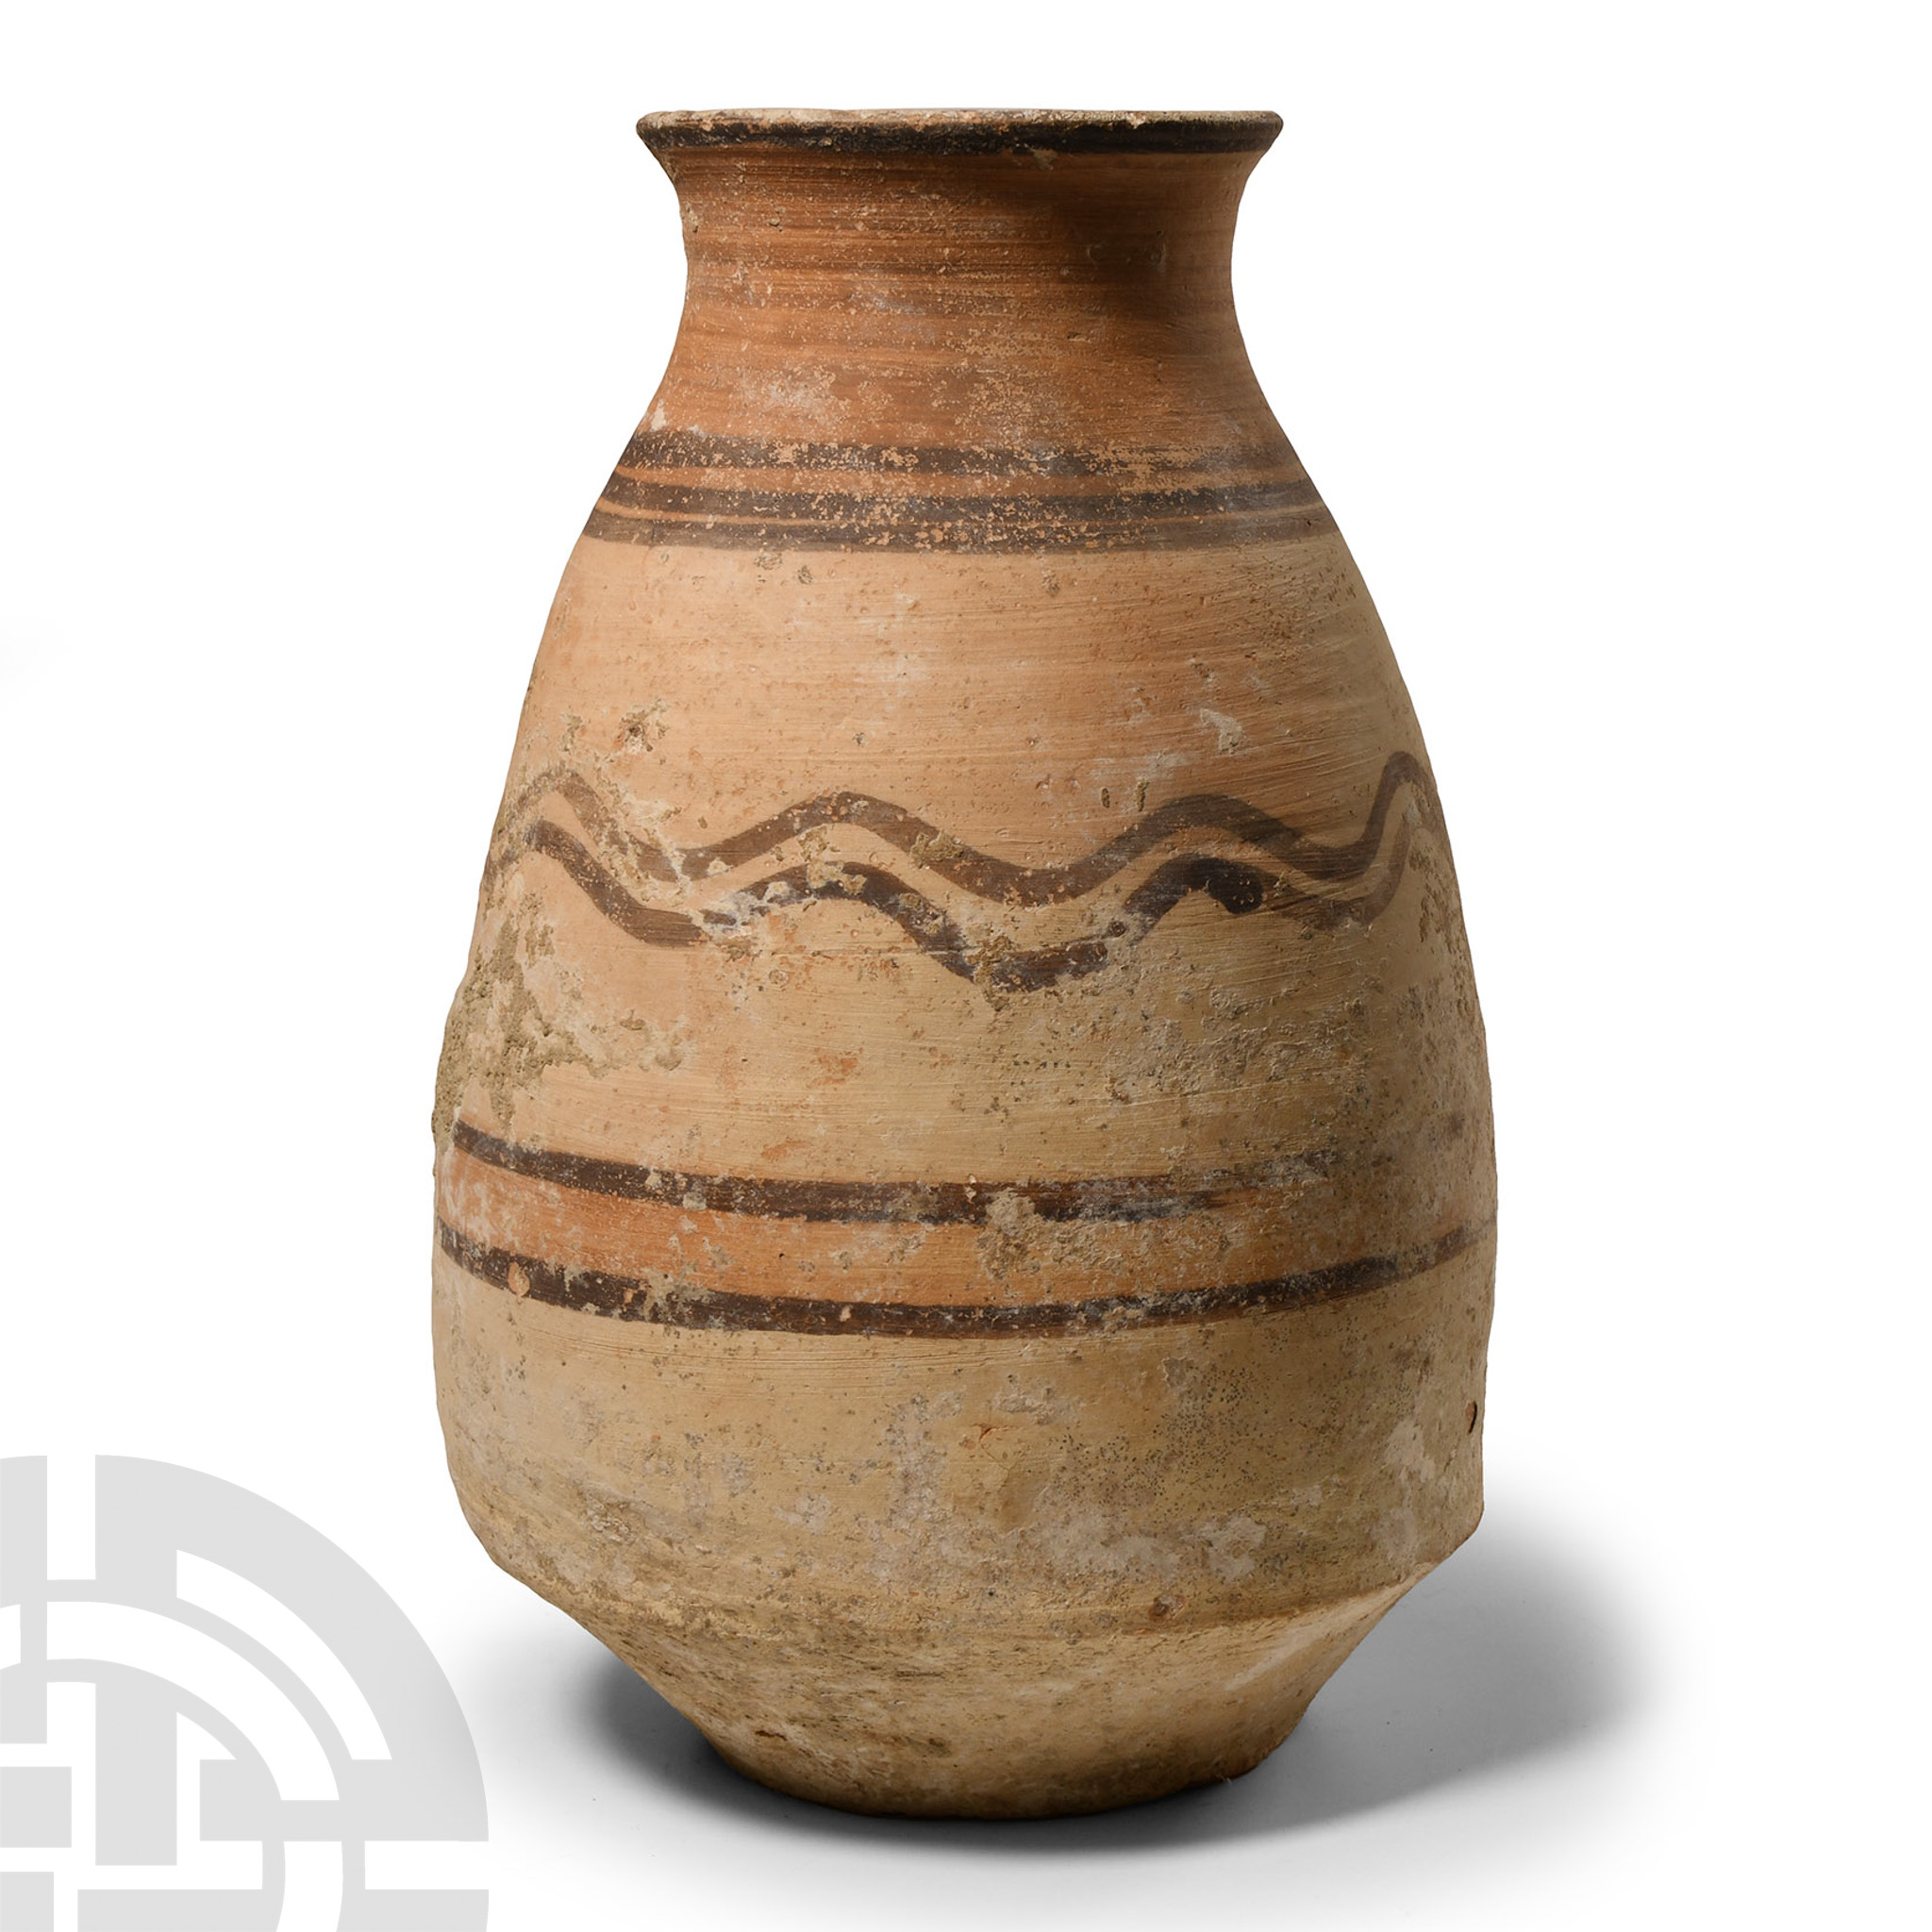 Large Indus Valley Terracotta Jar with River Pattern